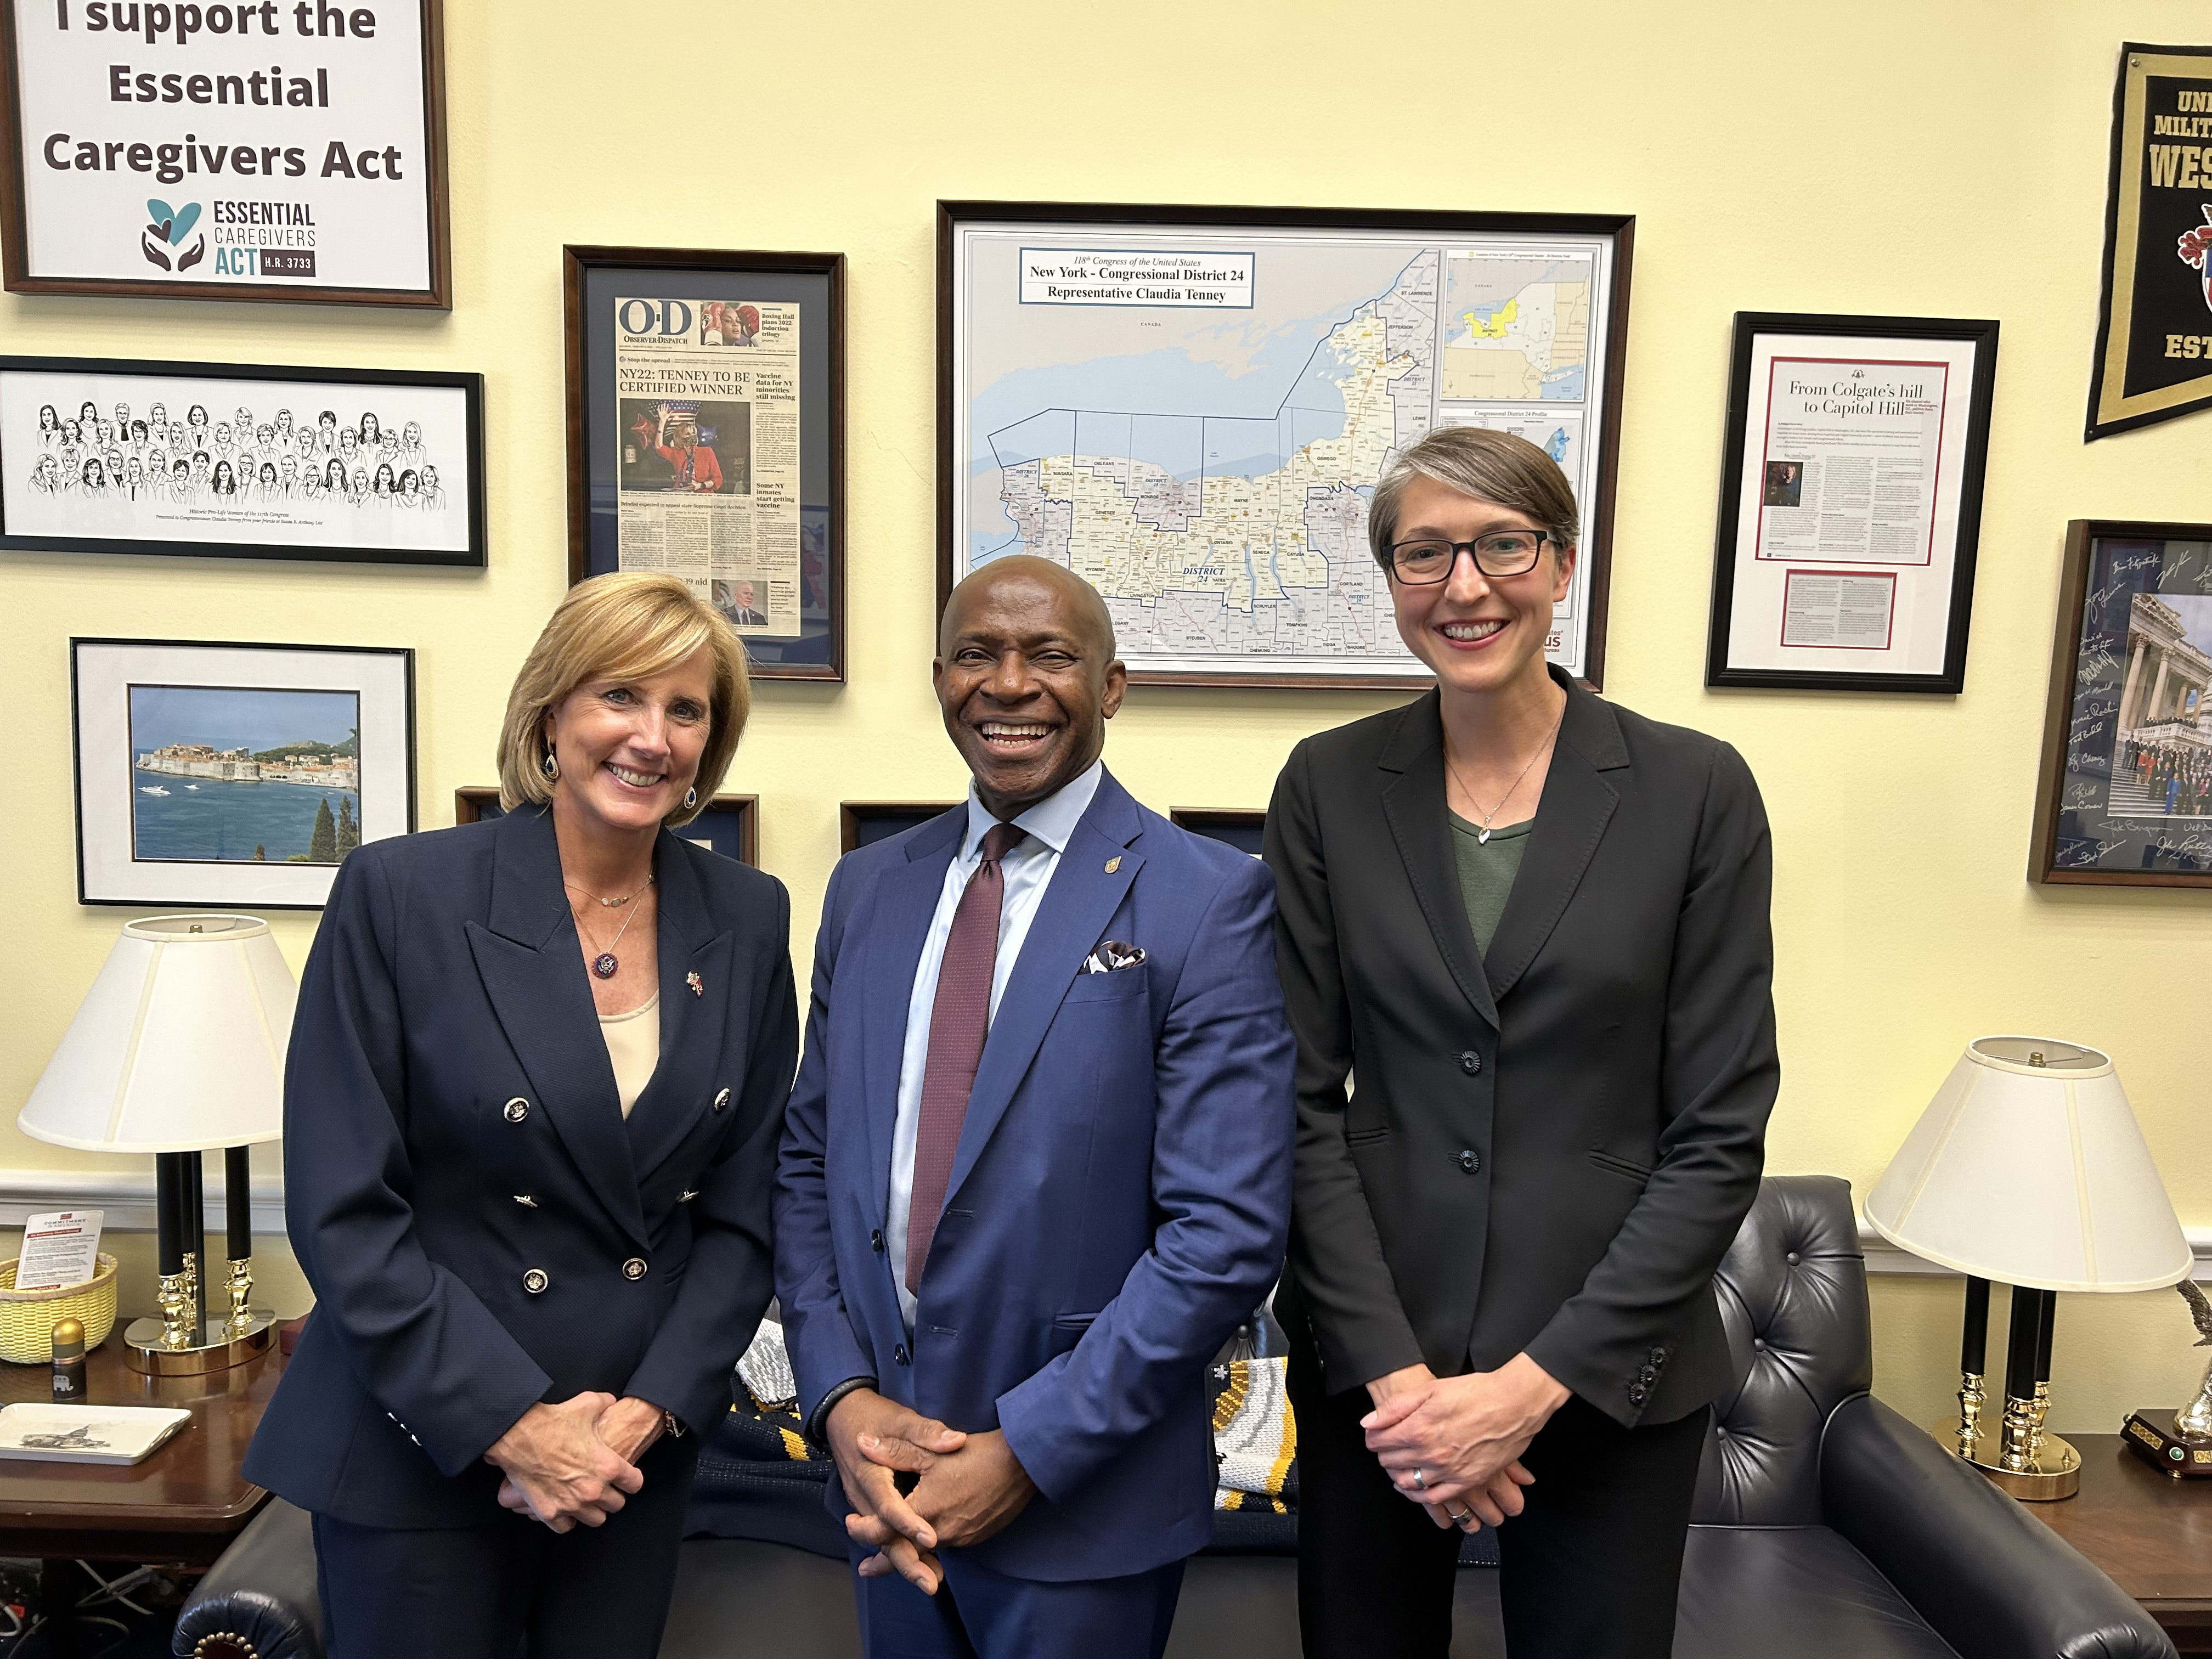 During SUNY D.C. Day, SUNY Oswego President Peter O. Nwosu and Assistant Vice President of Workforce Innovation and External Relations Kristi Eck met with representatives including U.S. Congresswoman Claudia Tenney.